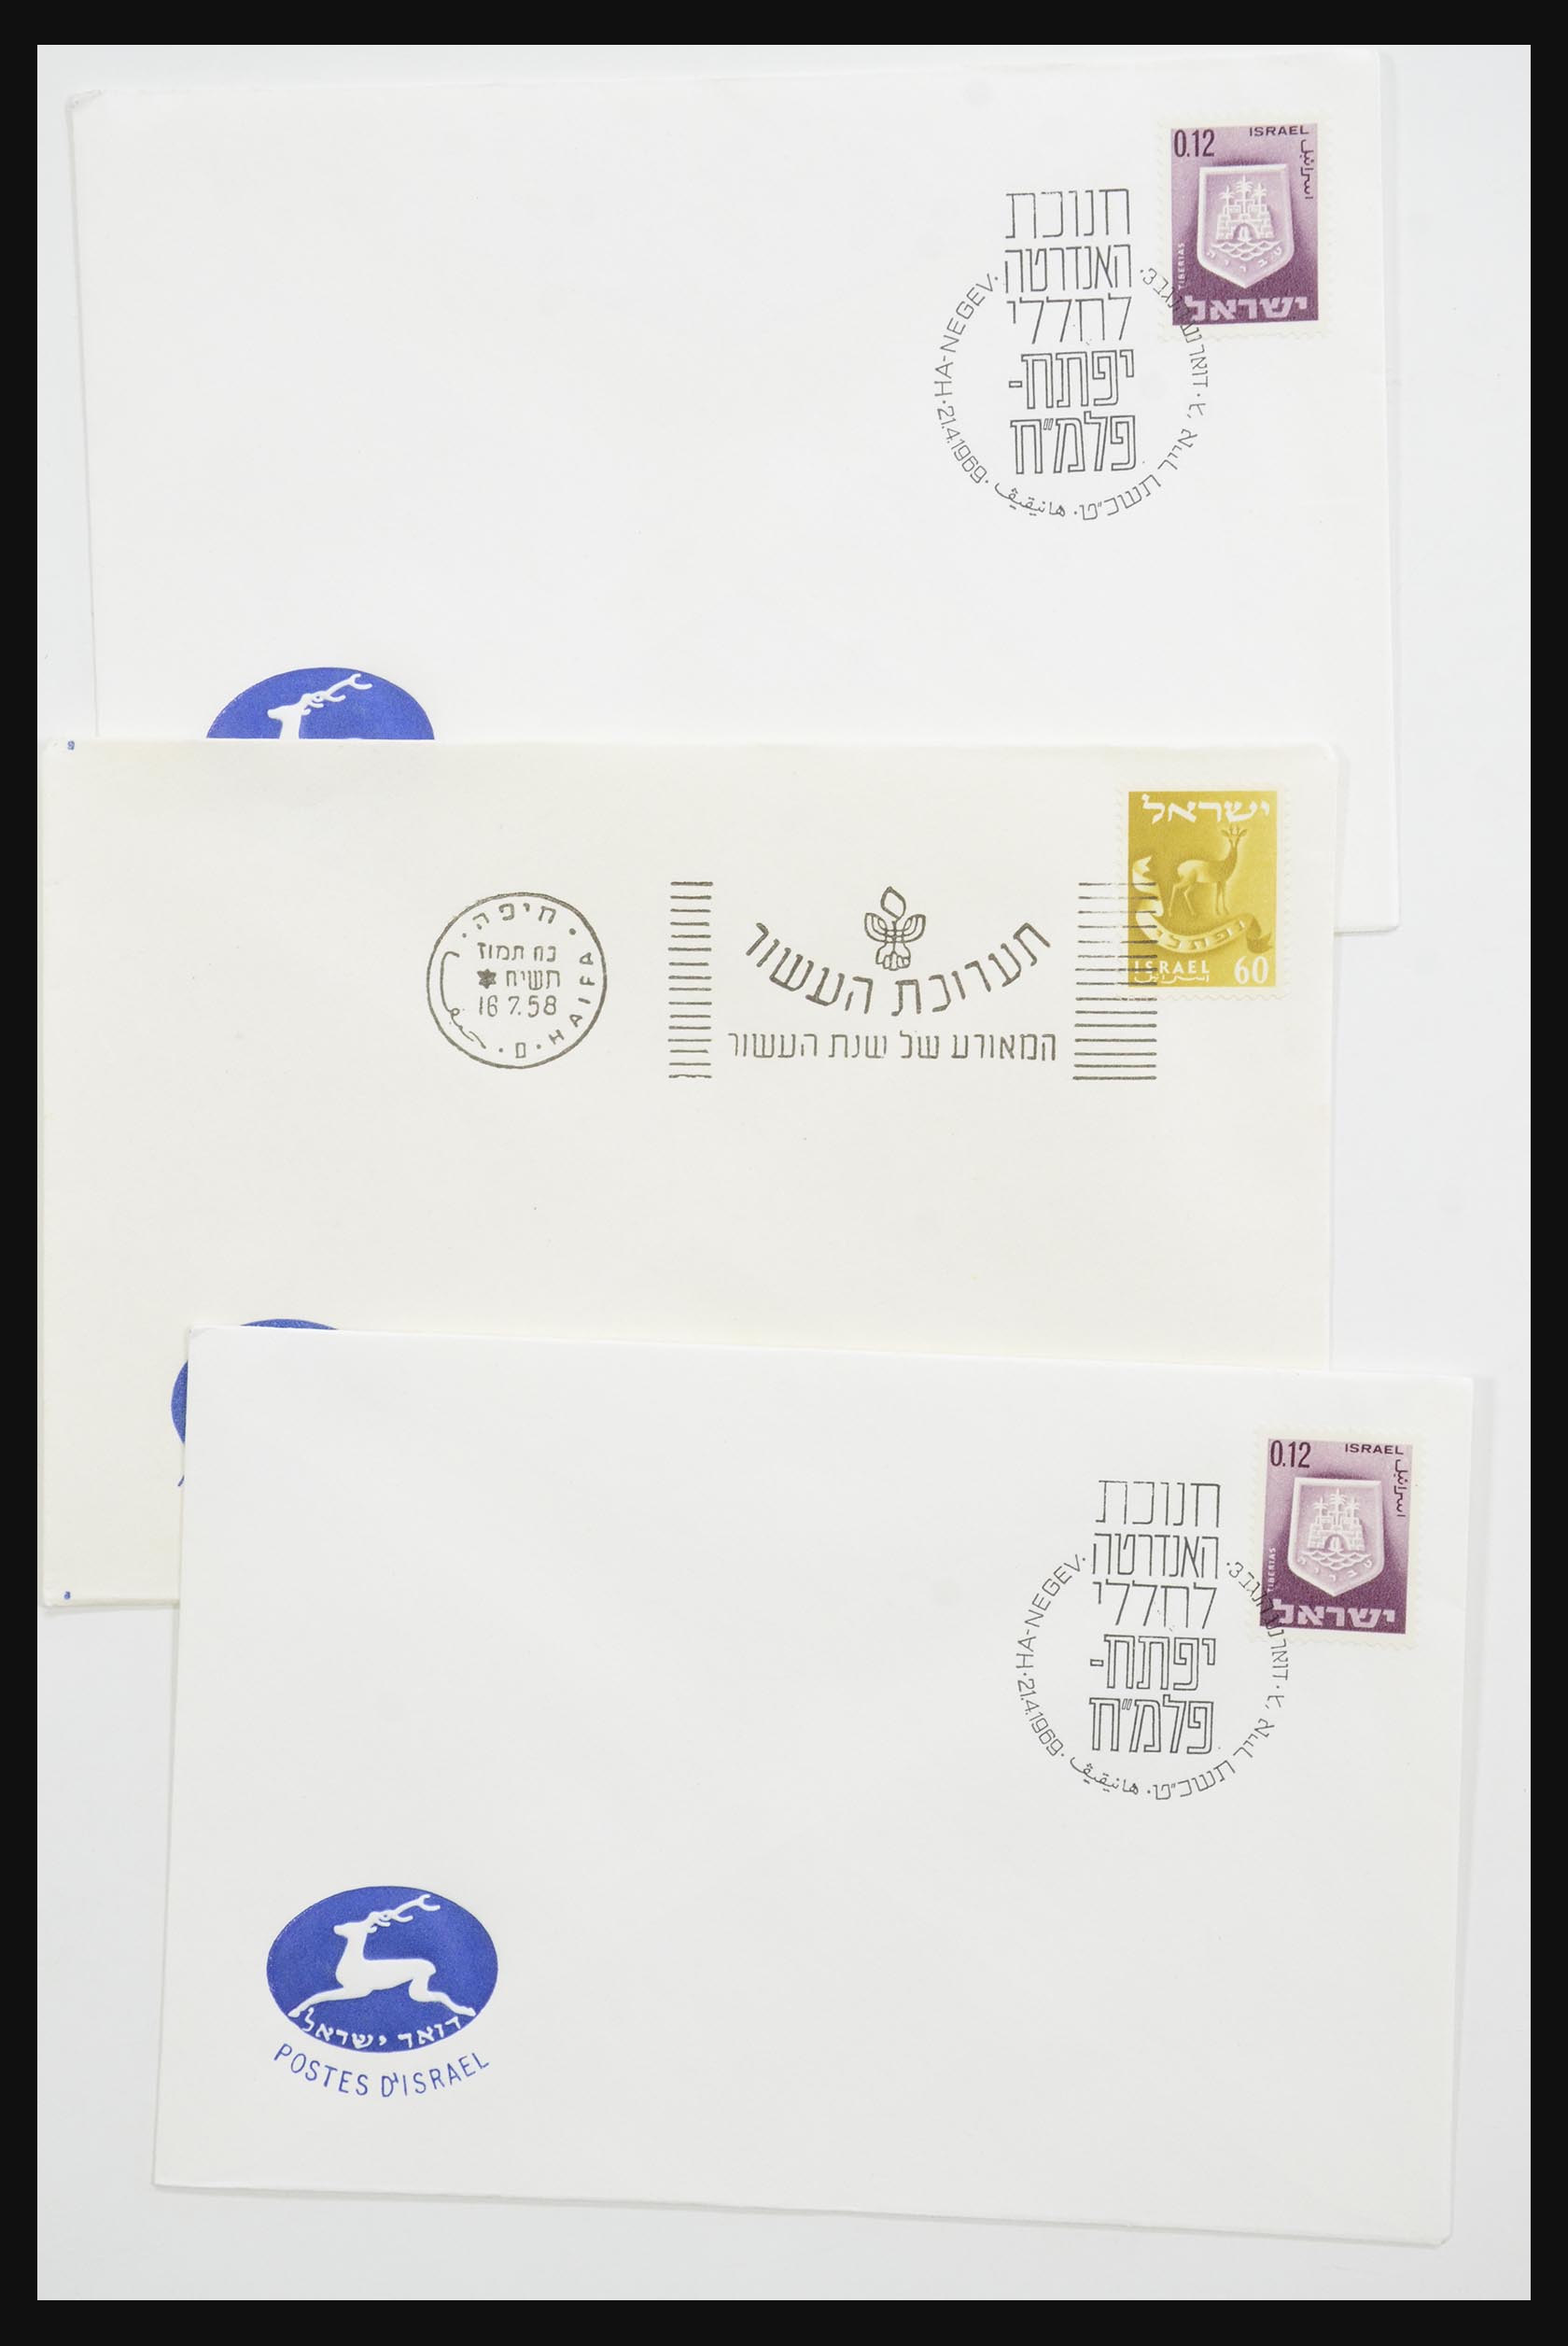 31924 097 - 31924 Israel first day cover collection 1957-2003.